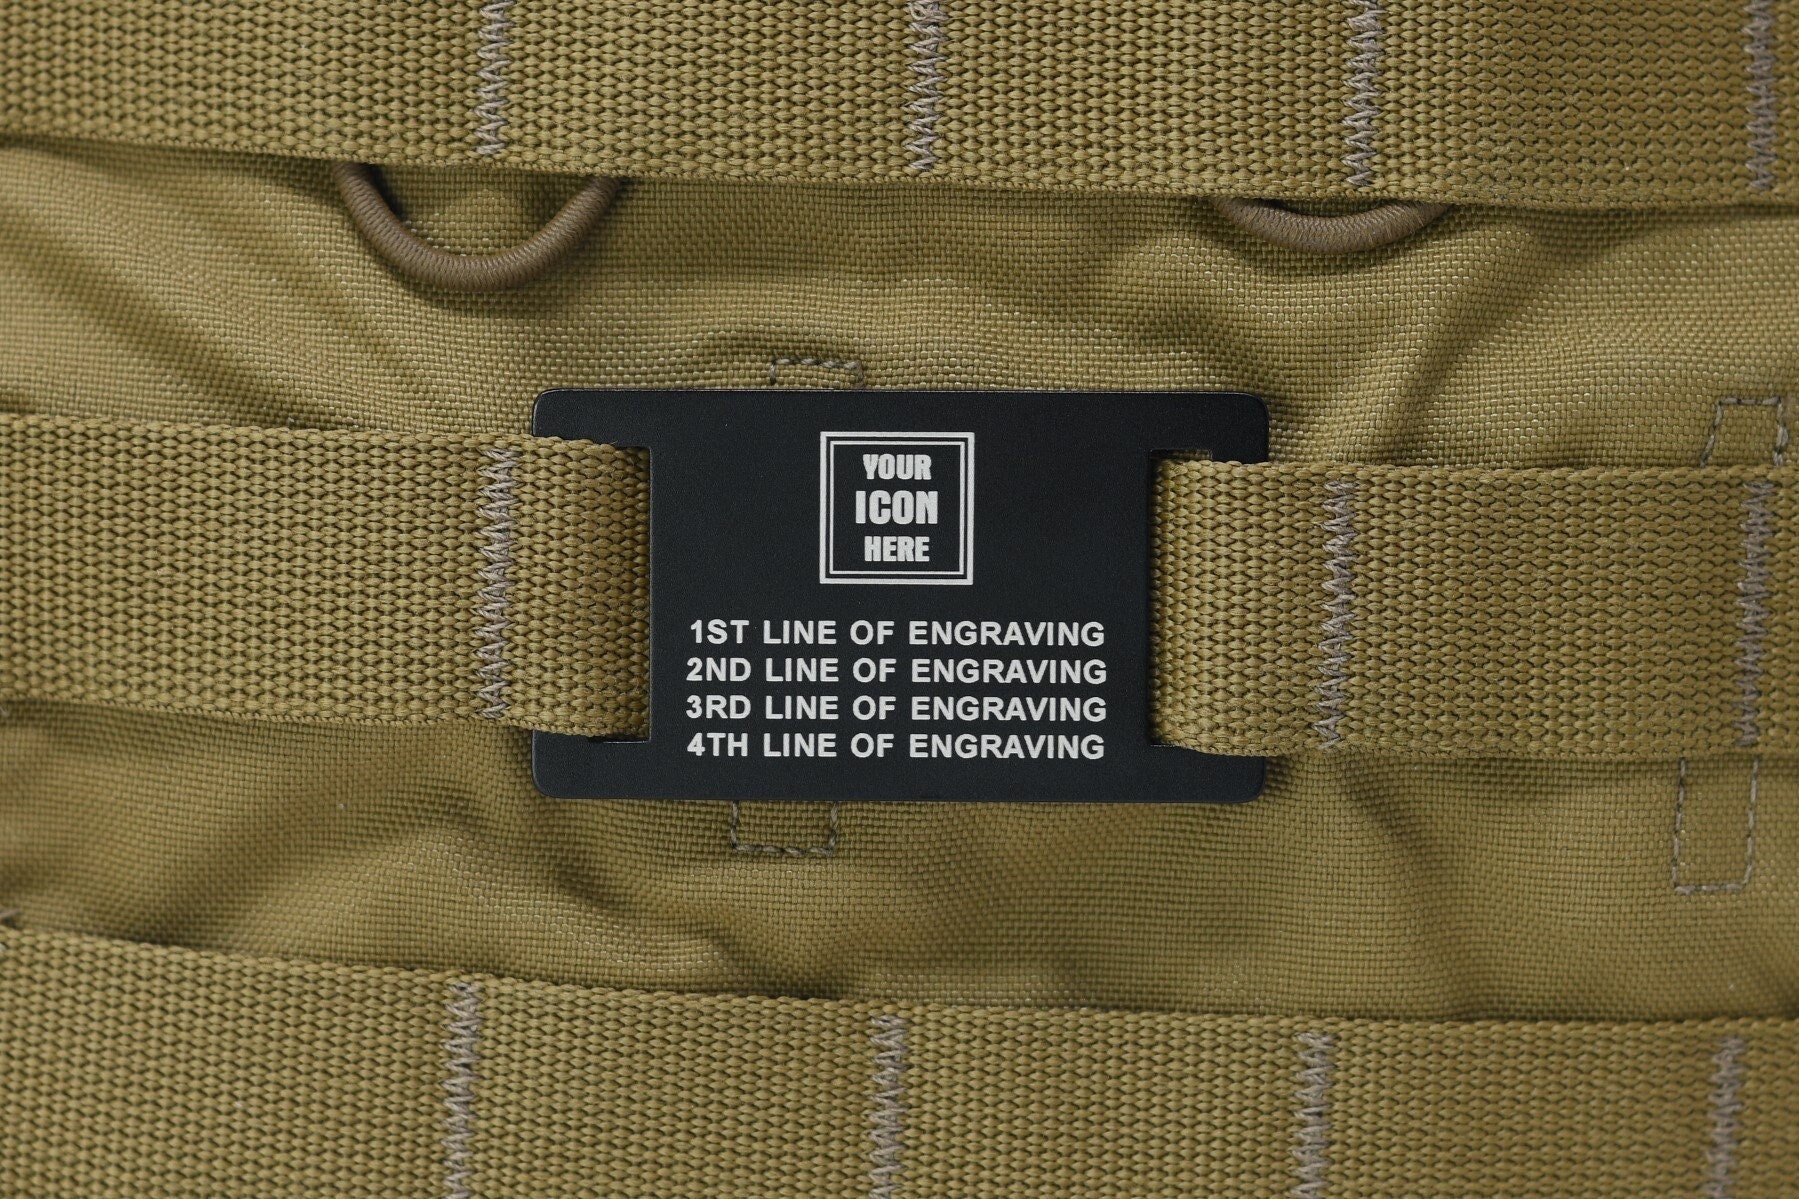 MiOYOOW 3PCS Molle Patch Panel, Tactical Patches Molle Attachment with  Cutting Loop for Outdoor Backpack Tactical Vest